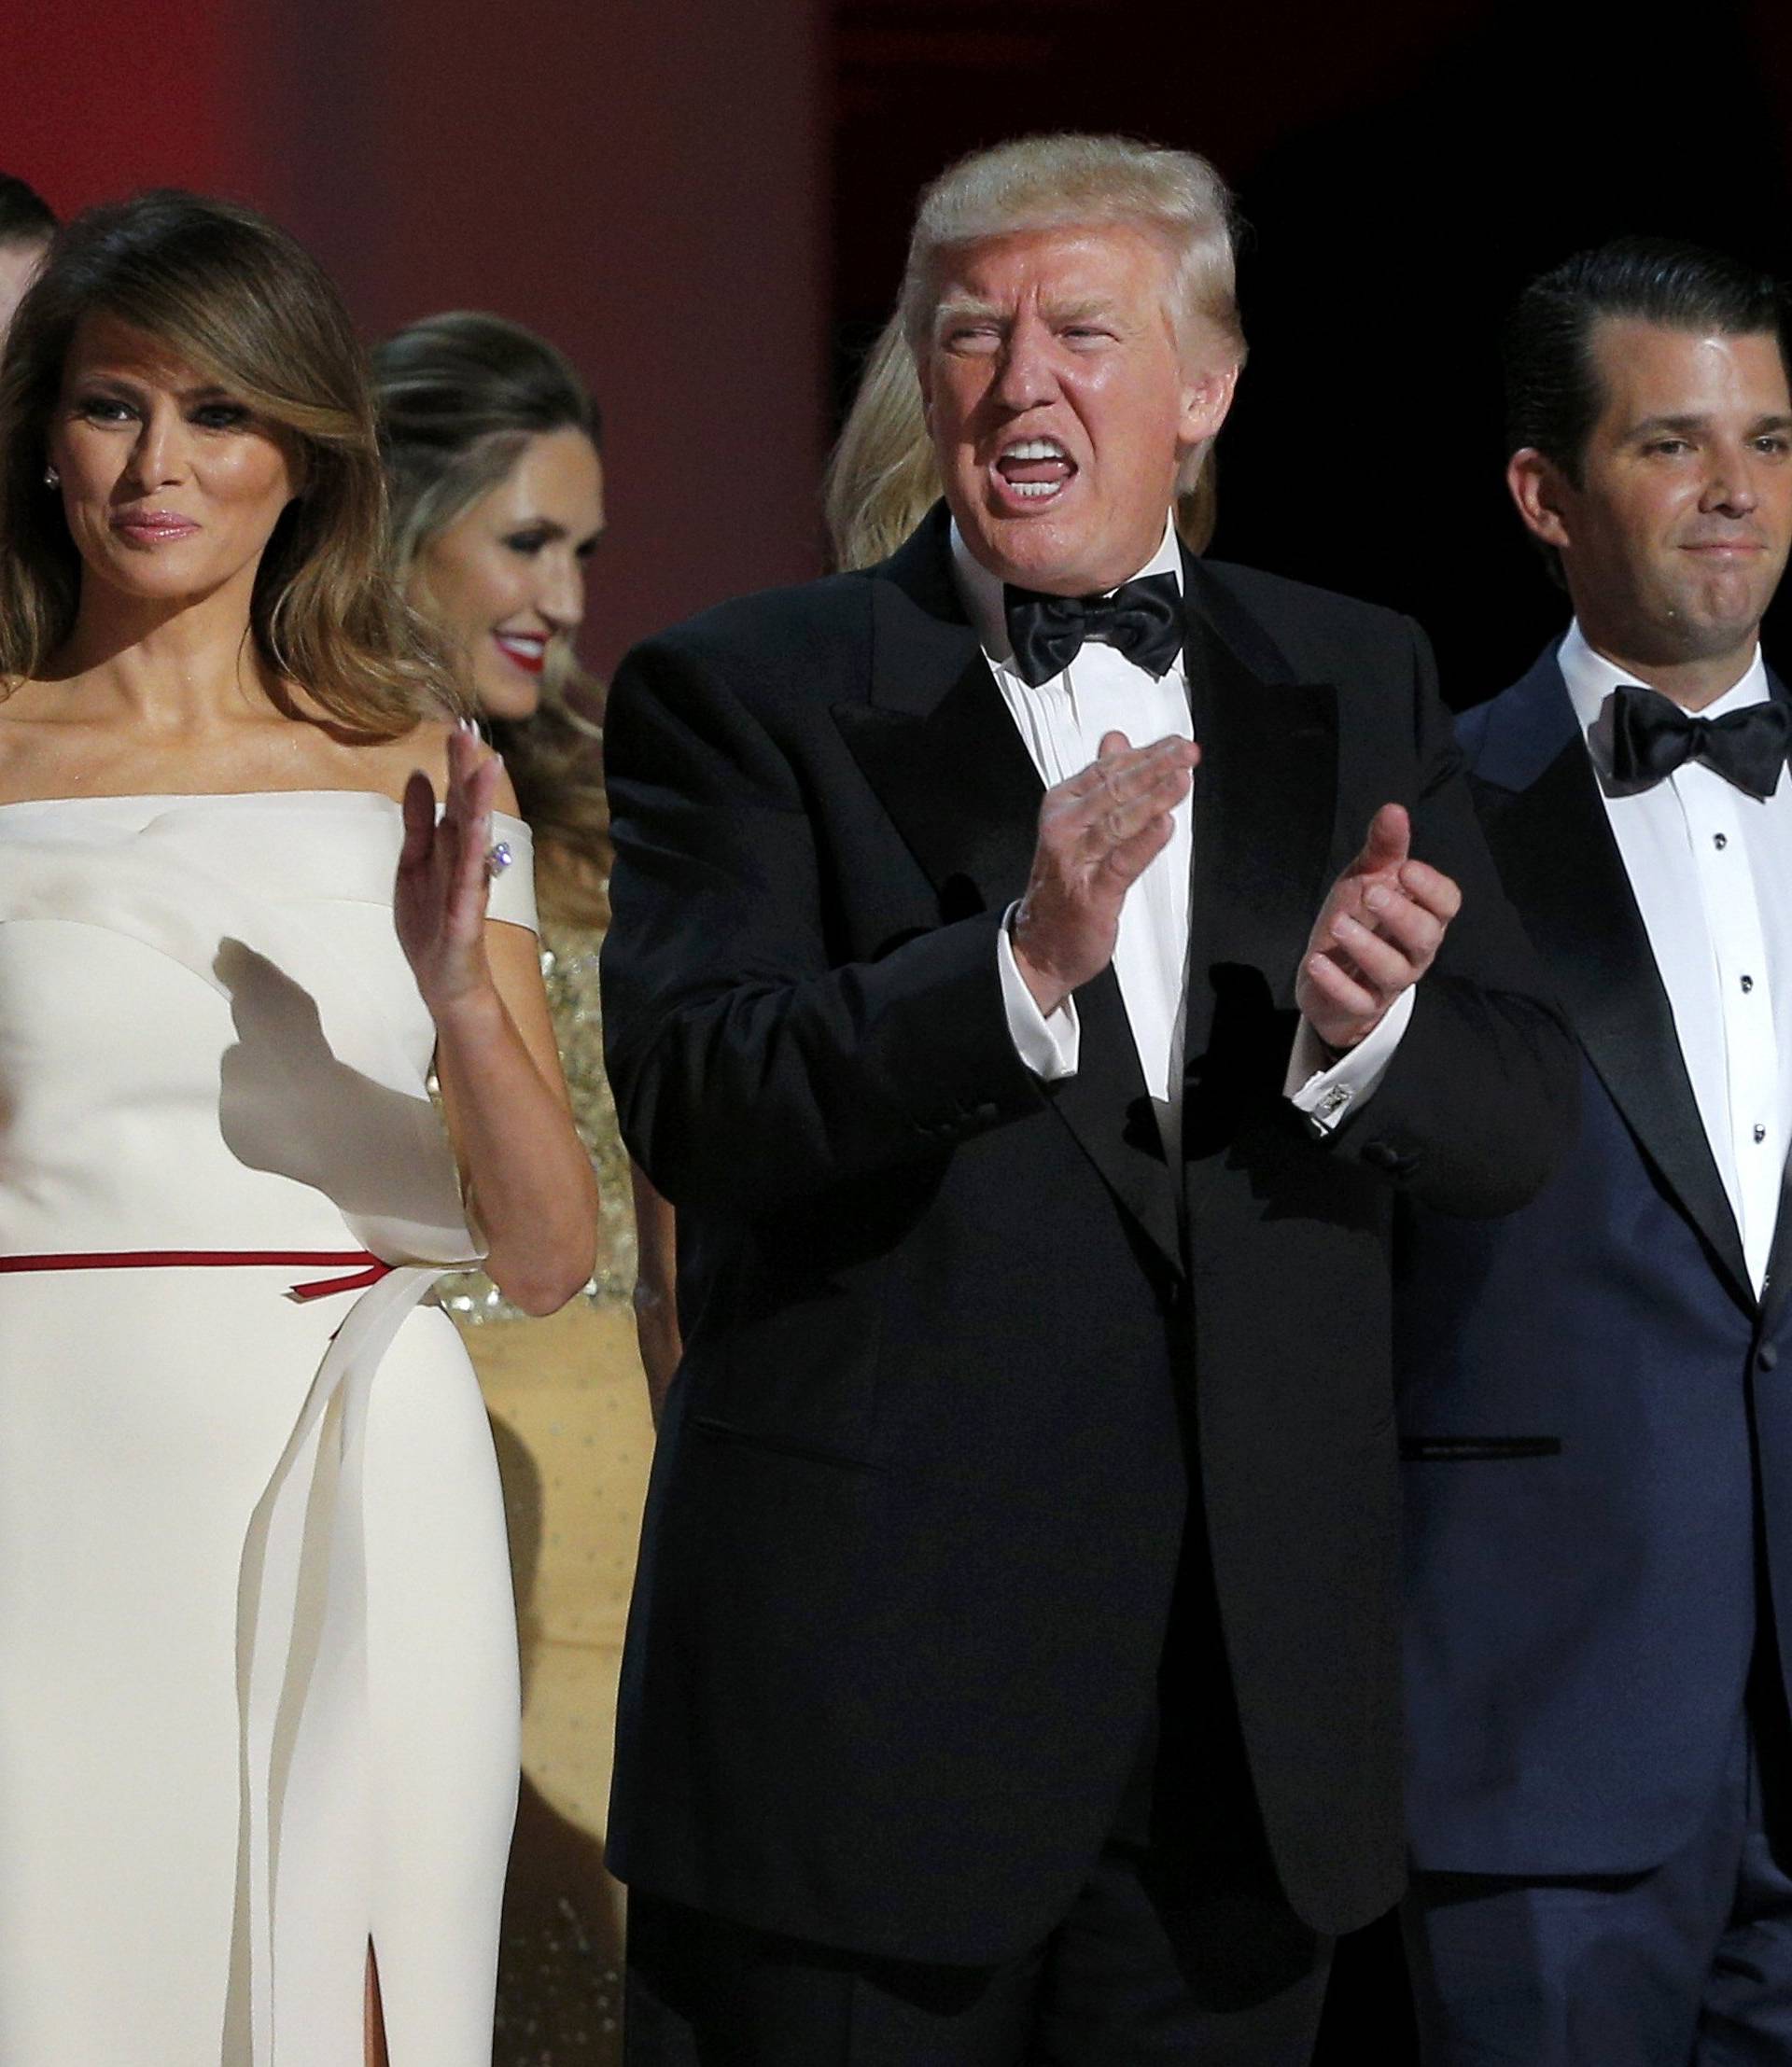 U.S. President Donald Trump applauds while flanked by his wife Melania and his son Donald Jr. at his "Liberty" Inaugural Ball in Washington